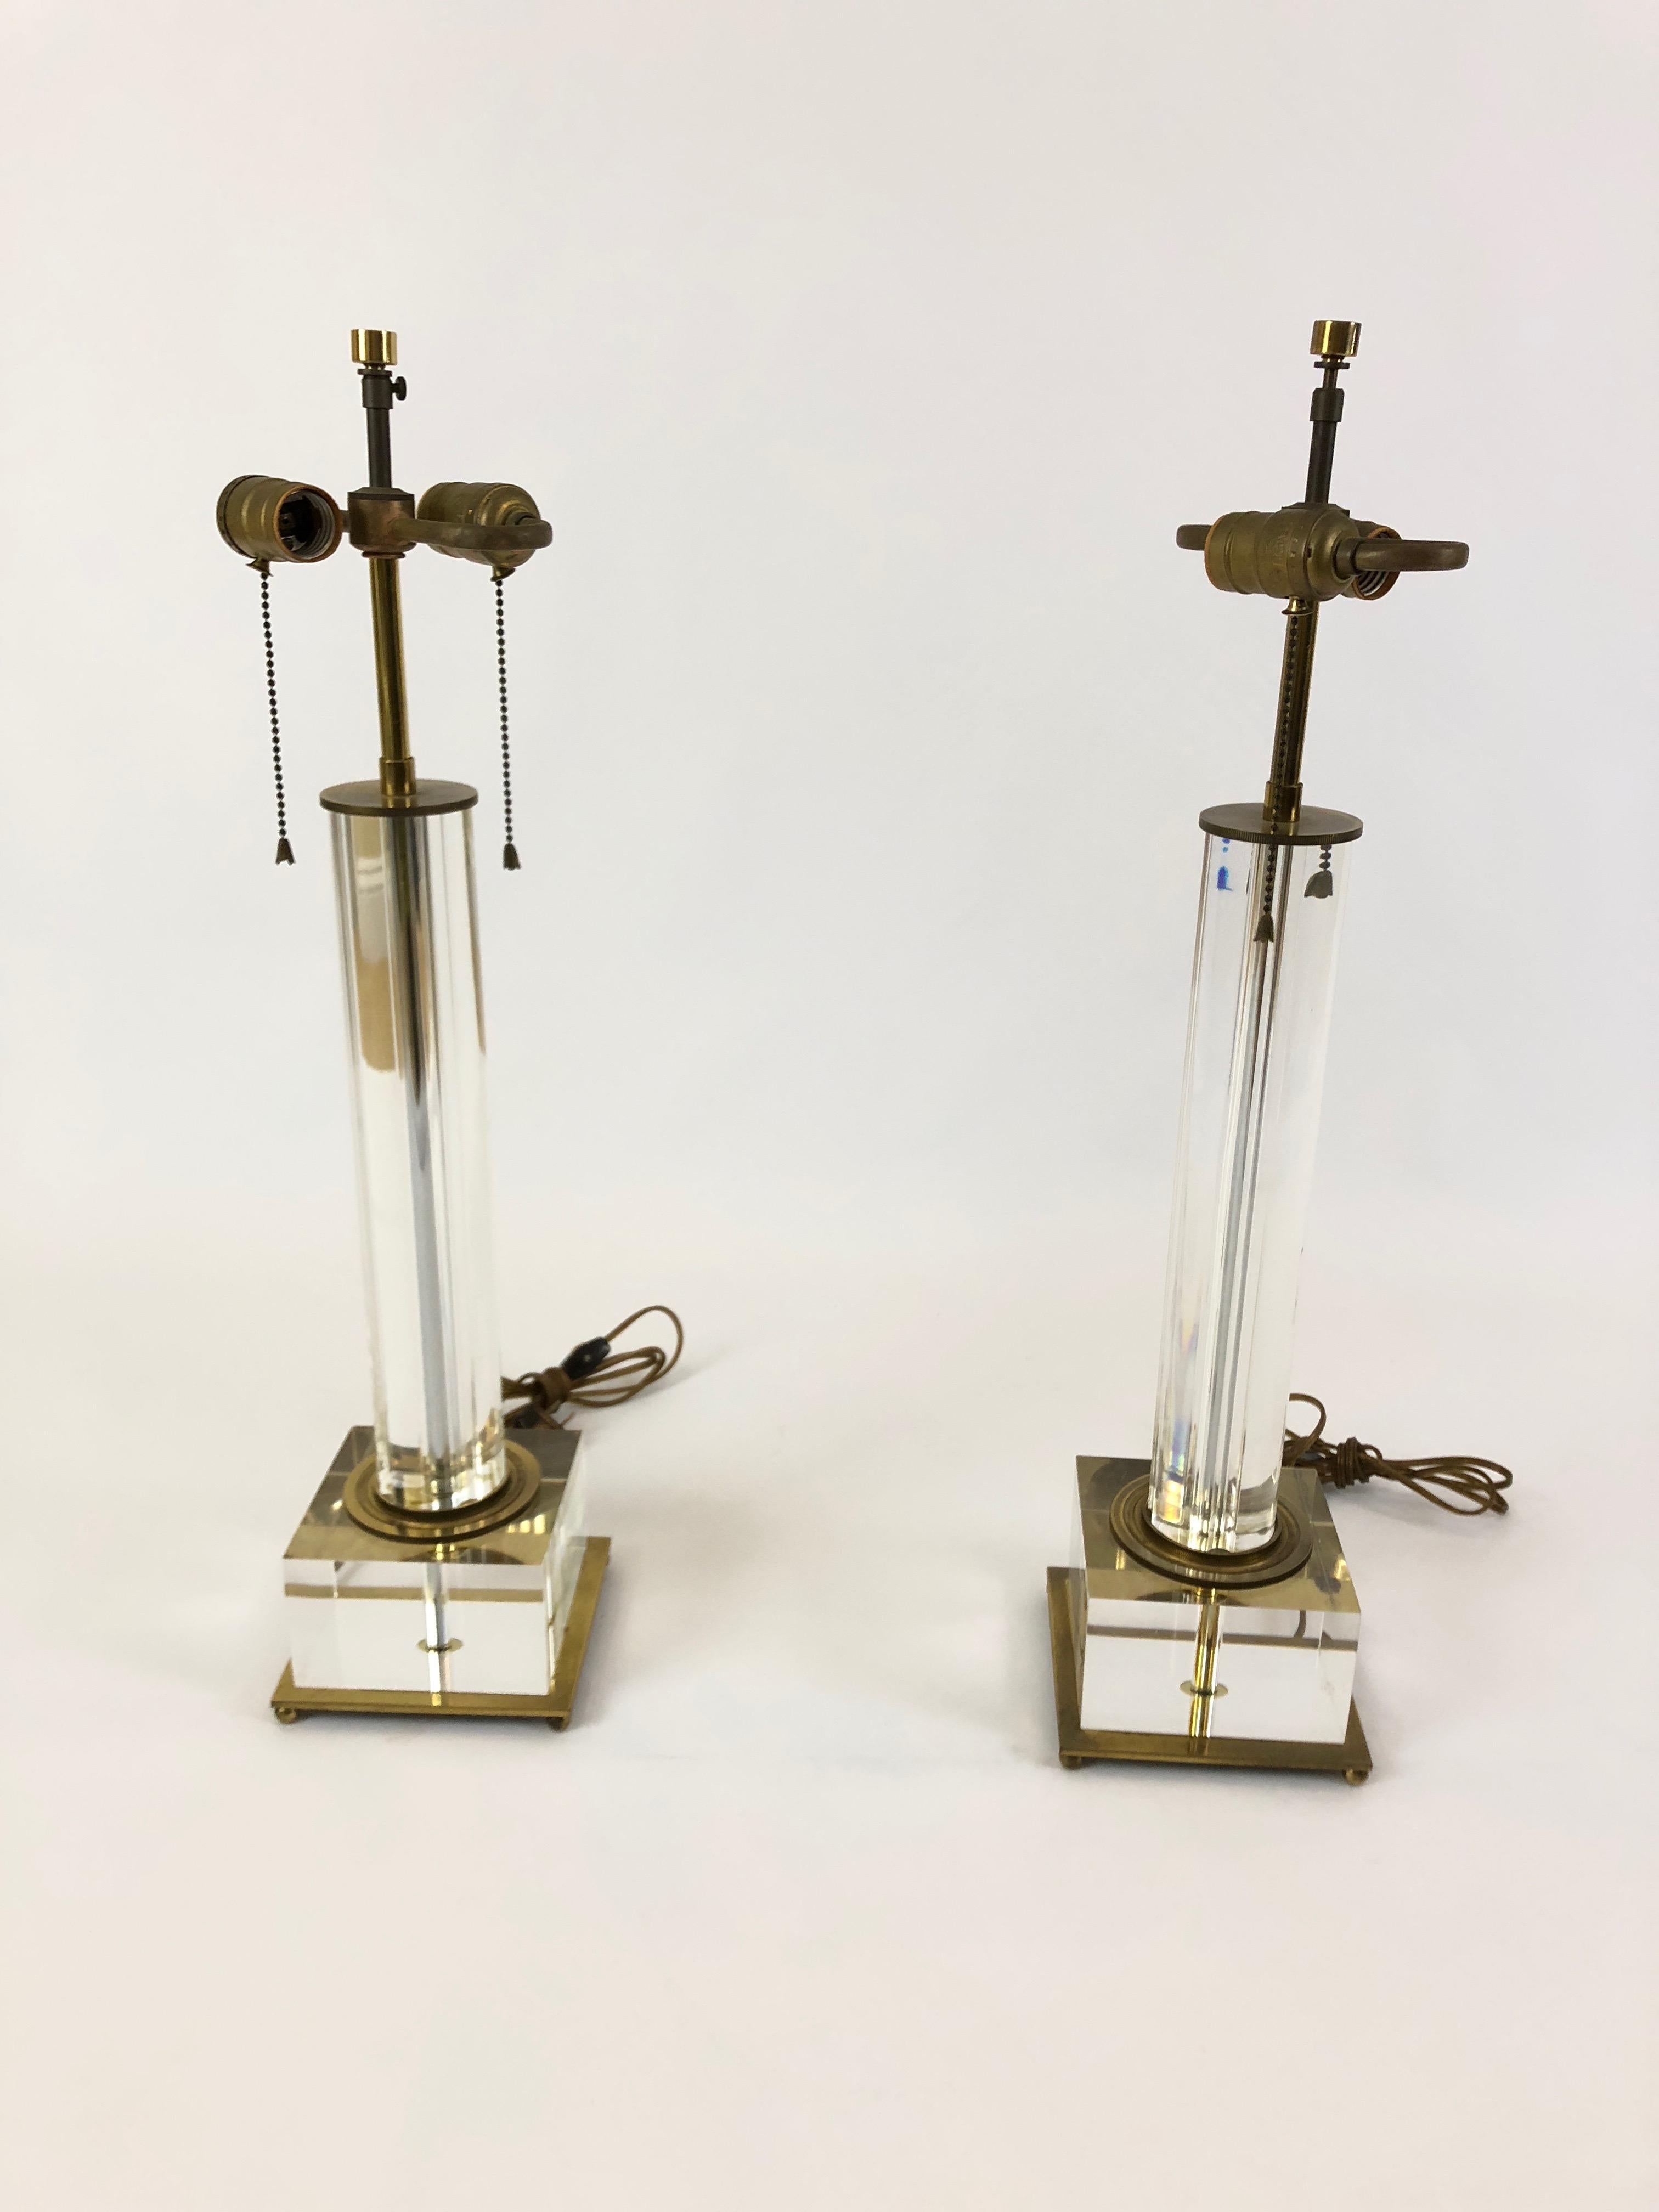 Elegant and glamorous pair of Lucite and brass Mid-Century Modern lamps having chunky 6 x 6 inch square bases and glistening columns with original string shades. There are double sockets in each lamp.